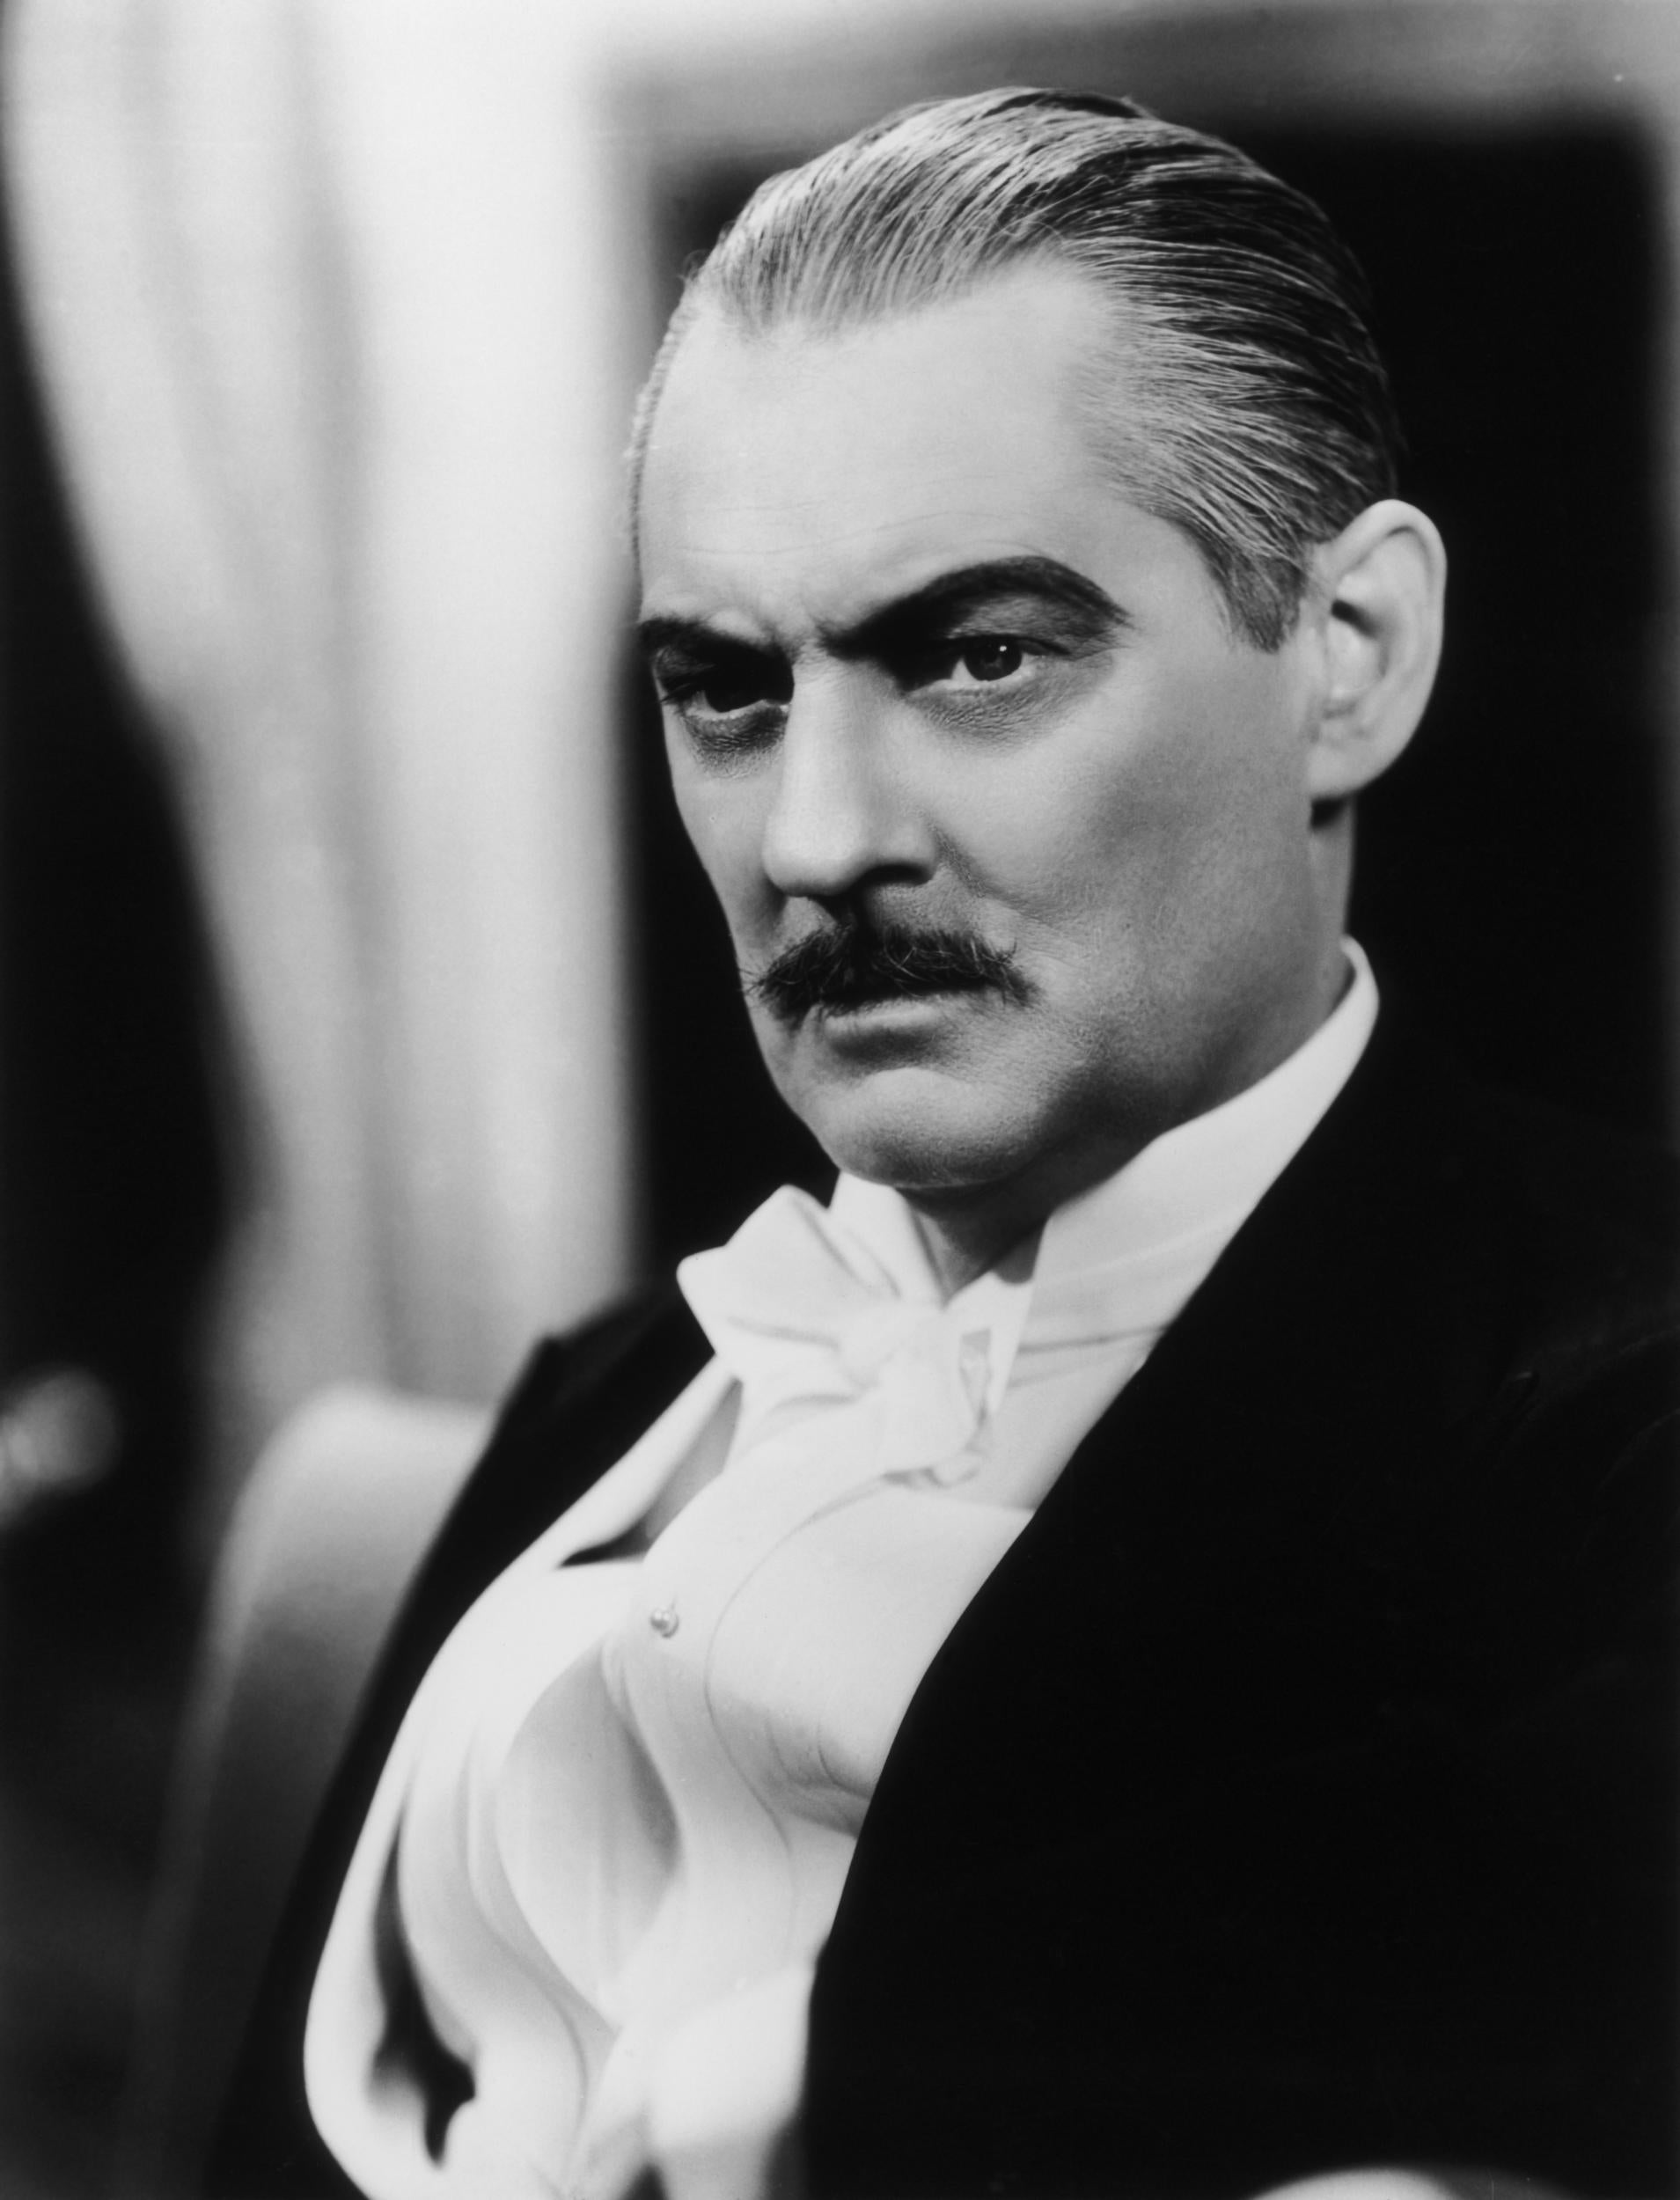 American actor Lionel Barrymore would play Scrooge on the radio in 1939